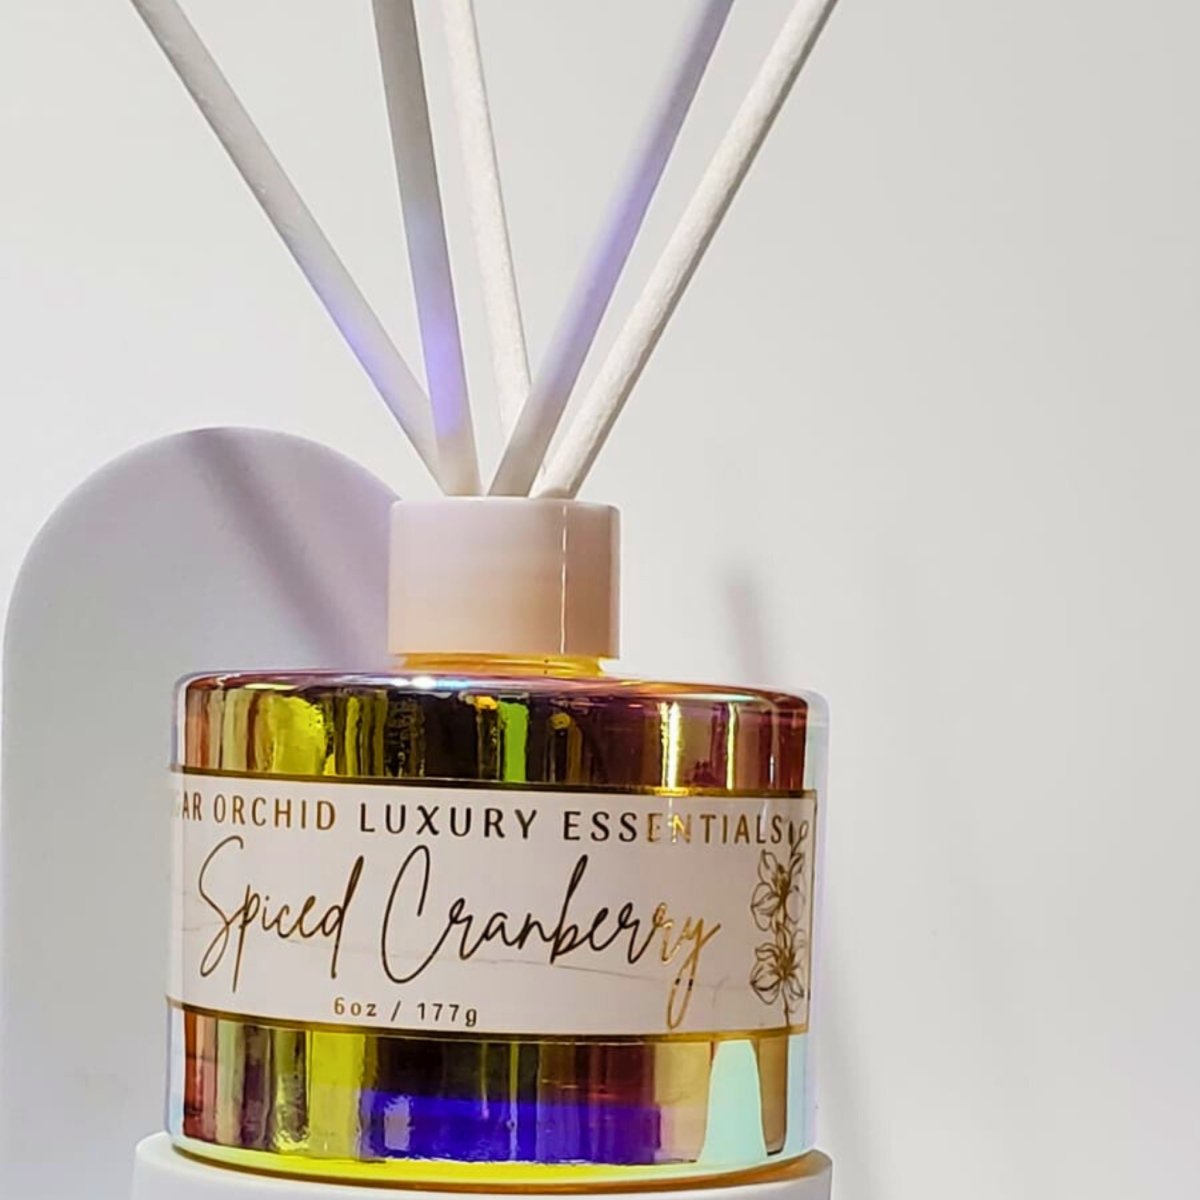 Spiced Cranberry - Opal Room Diffuser - Sugar Orchid Luxury Essentials